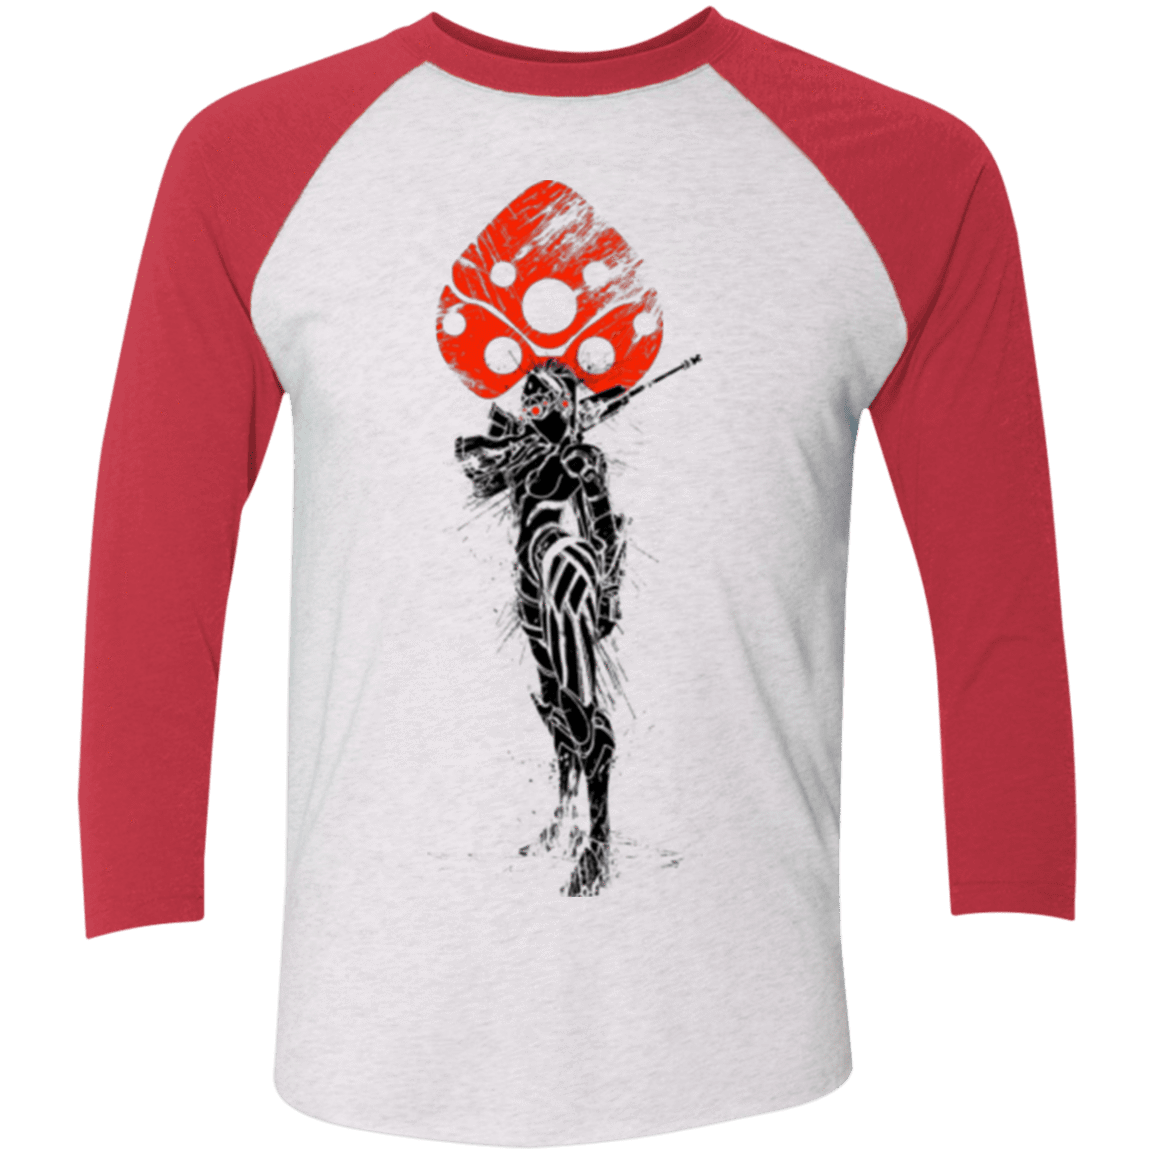 T-Shirts Heather White/Vintage Red / X-Small TRADITIONAL WIDOW MAKER Men's Triblend 3/4 Sleeve